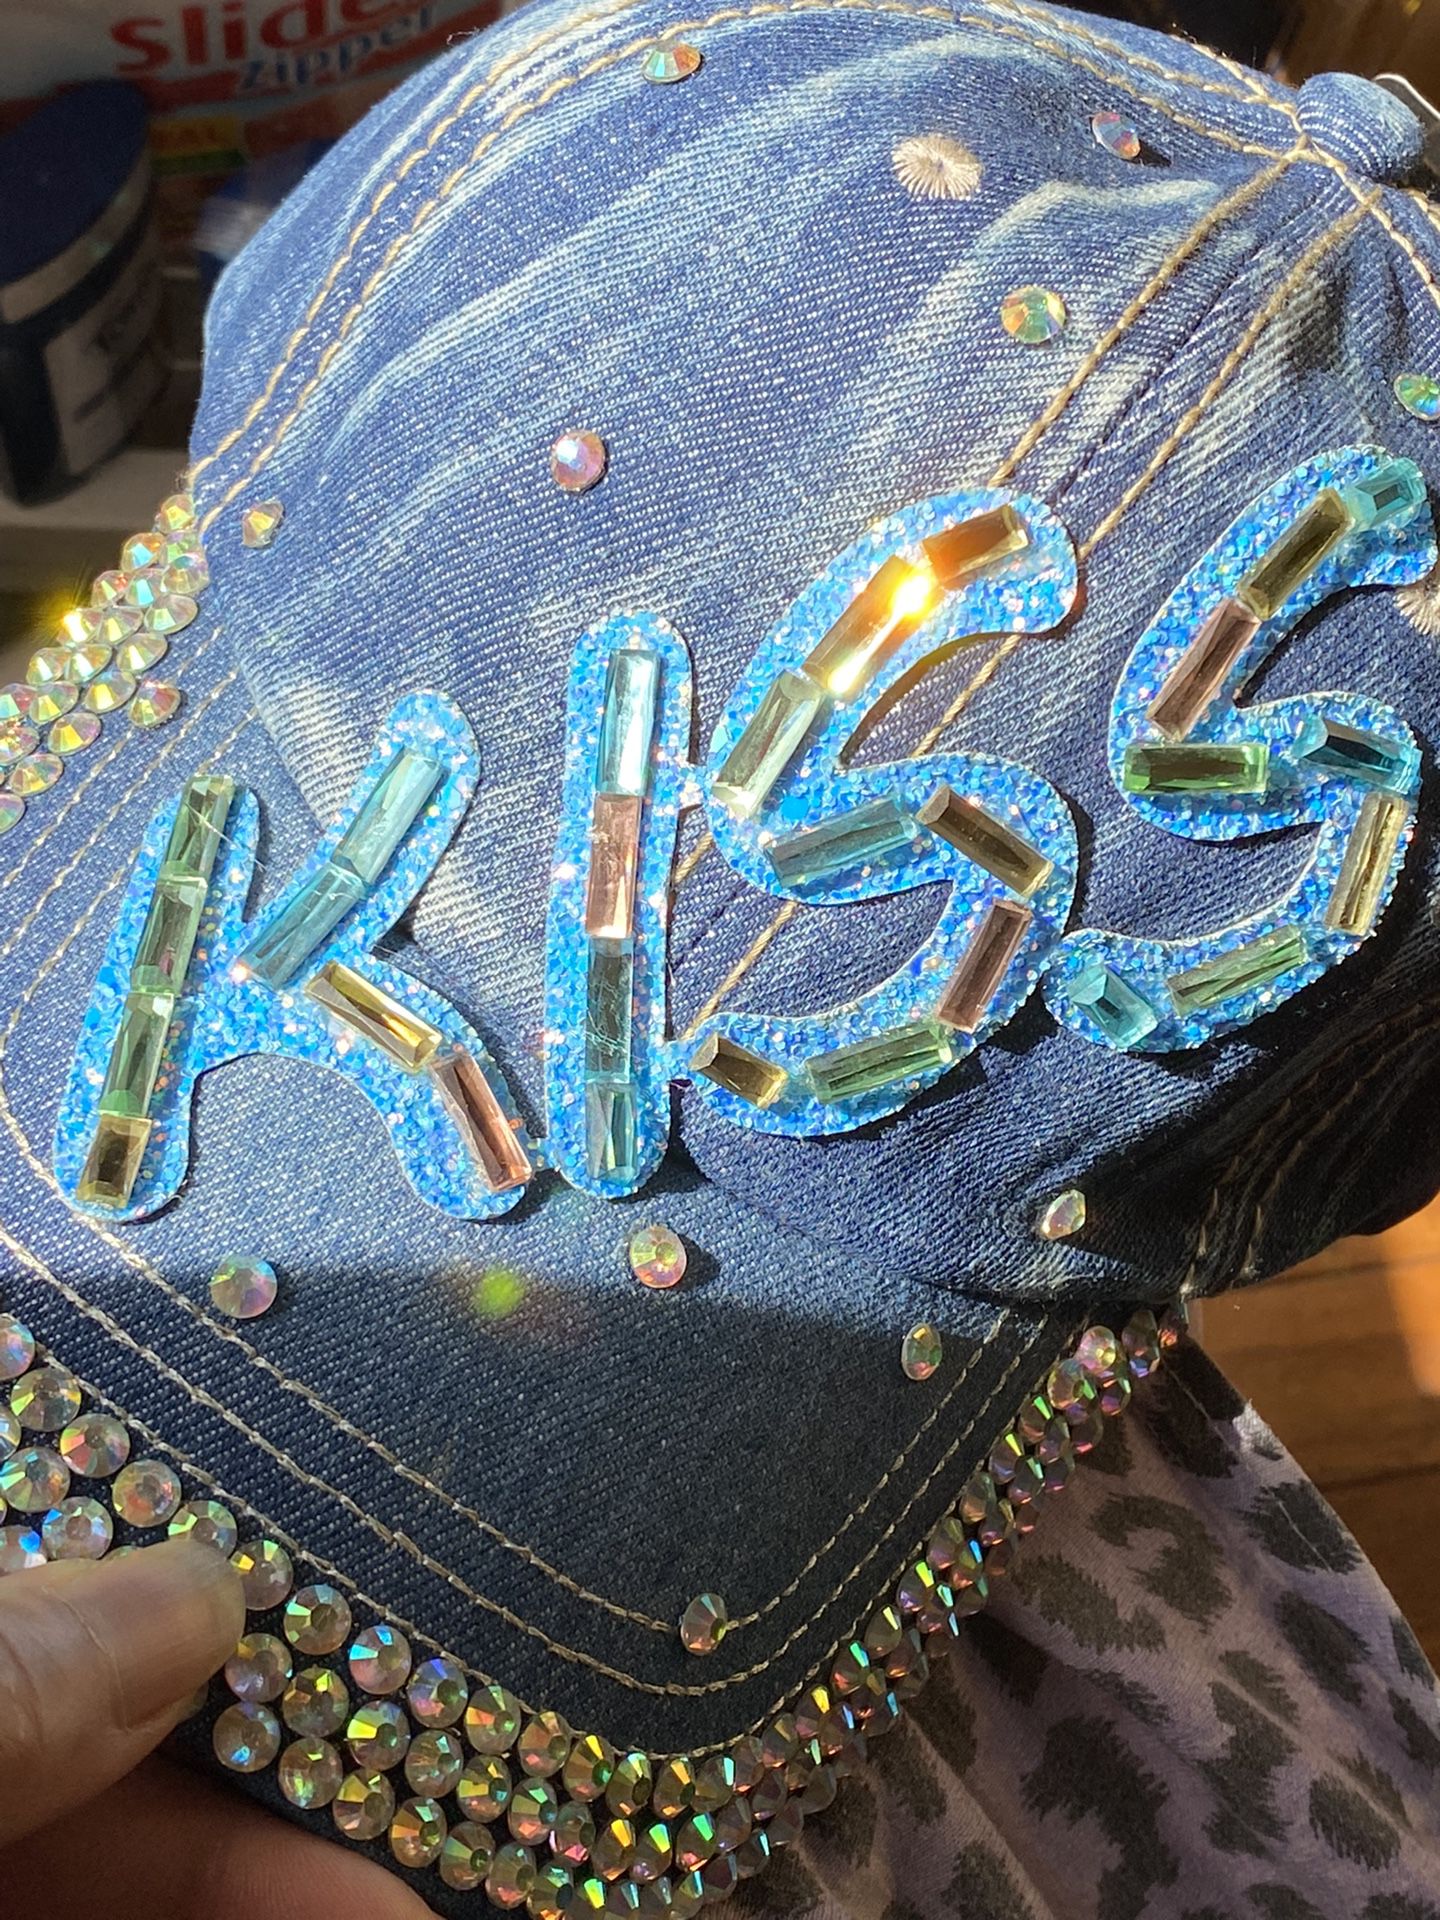 STYLE #12-KISS(DARK DENIM ). CUTE HAT W/BLING. SHINES & SHIMMERS IN THE LIGHT.